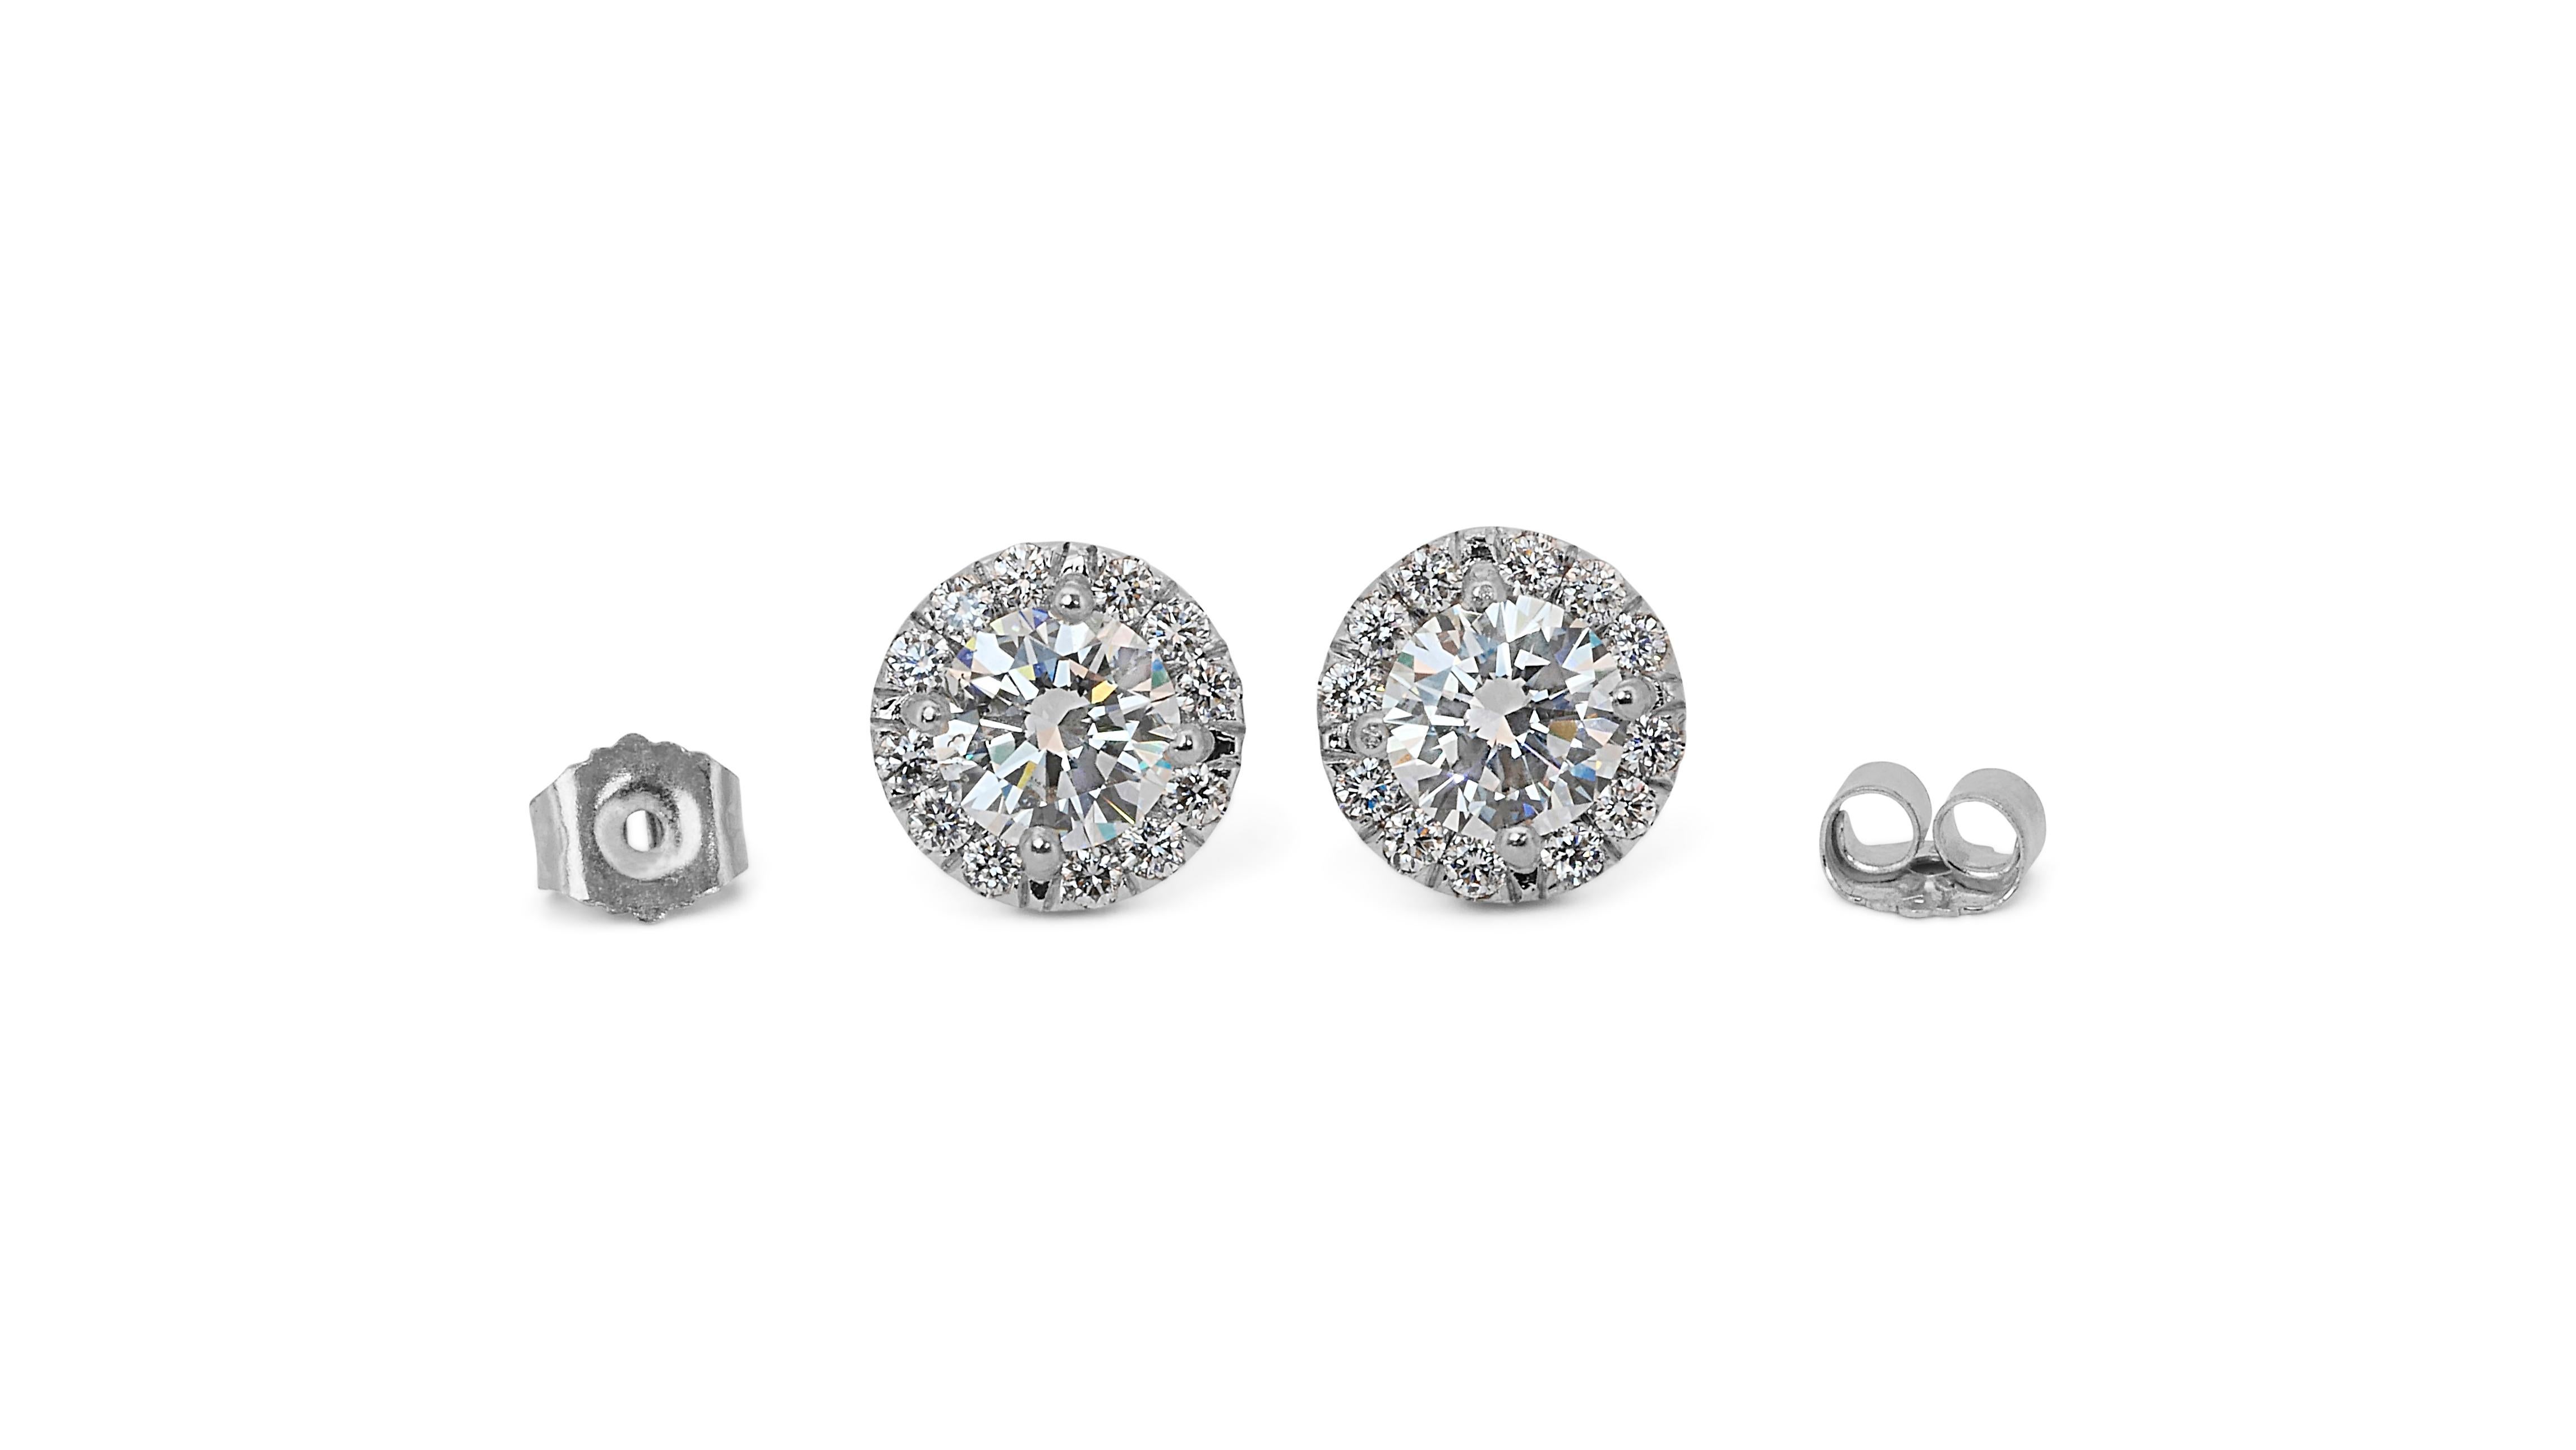 Lustrous 2.57ct Diamond Stud Earrings in 18k White Gold - GIA Certified For Sale 4